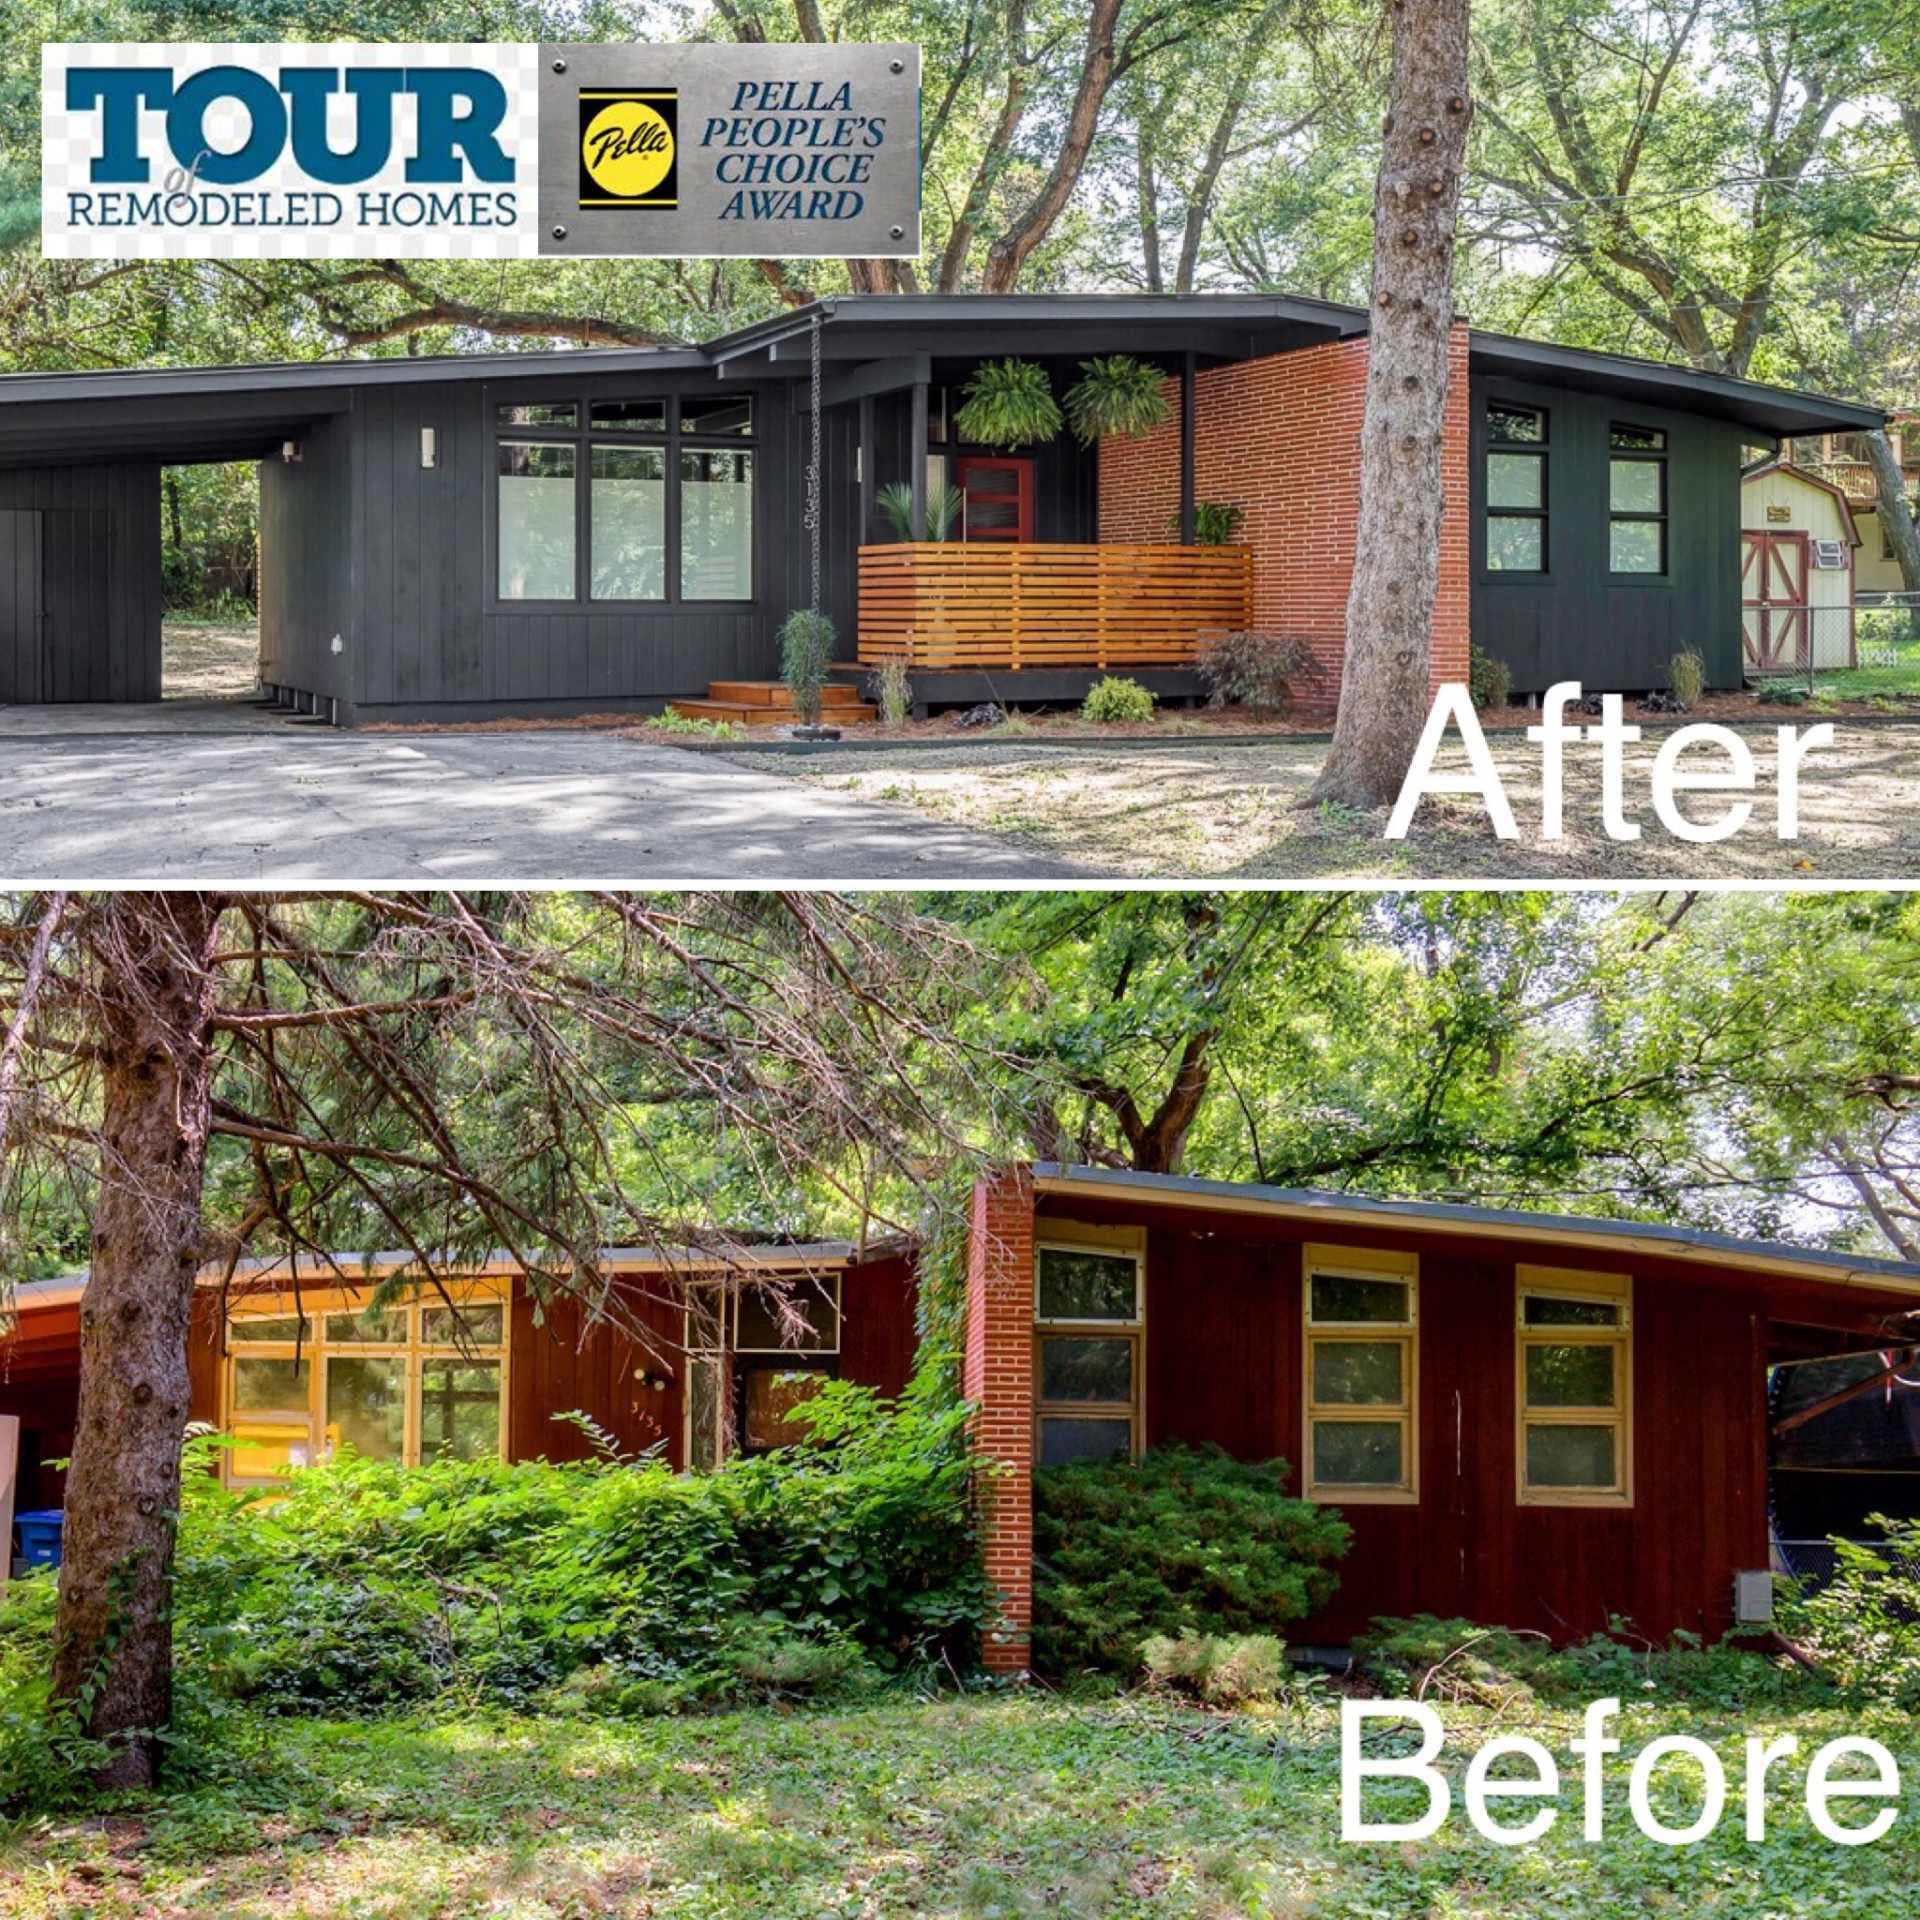 Before and After Tour of Remodeled Homes_11zon